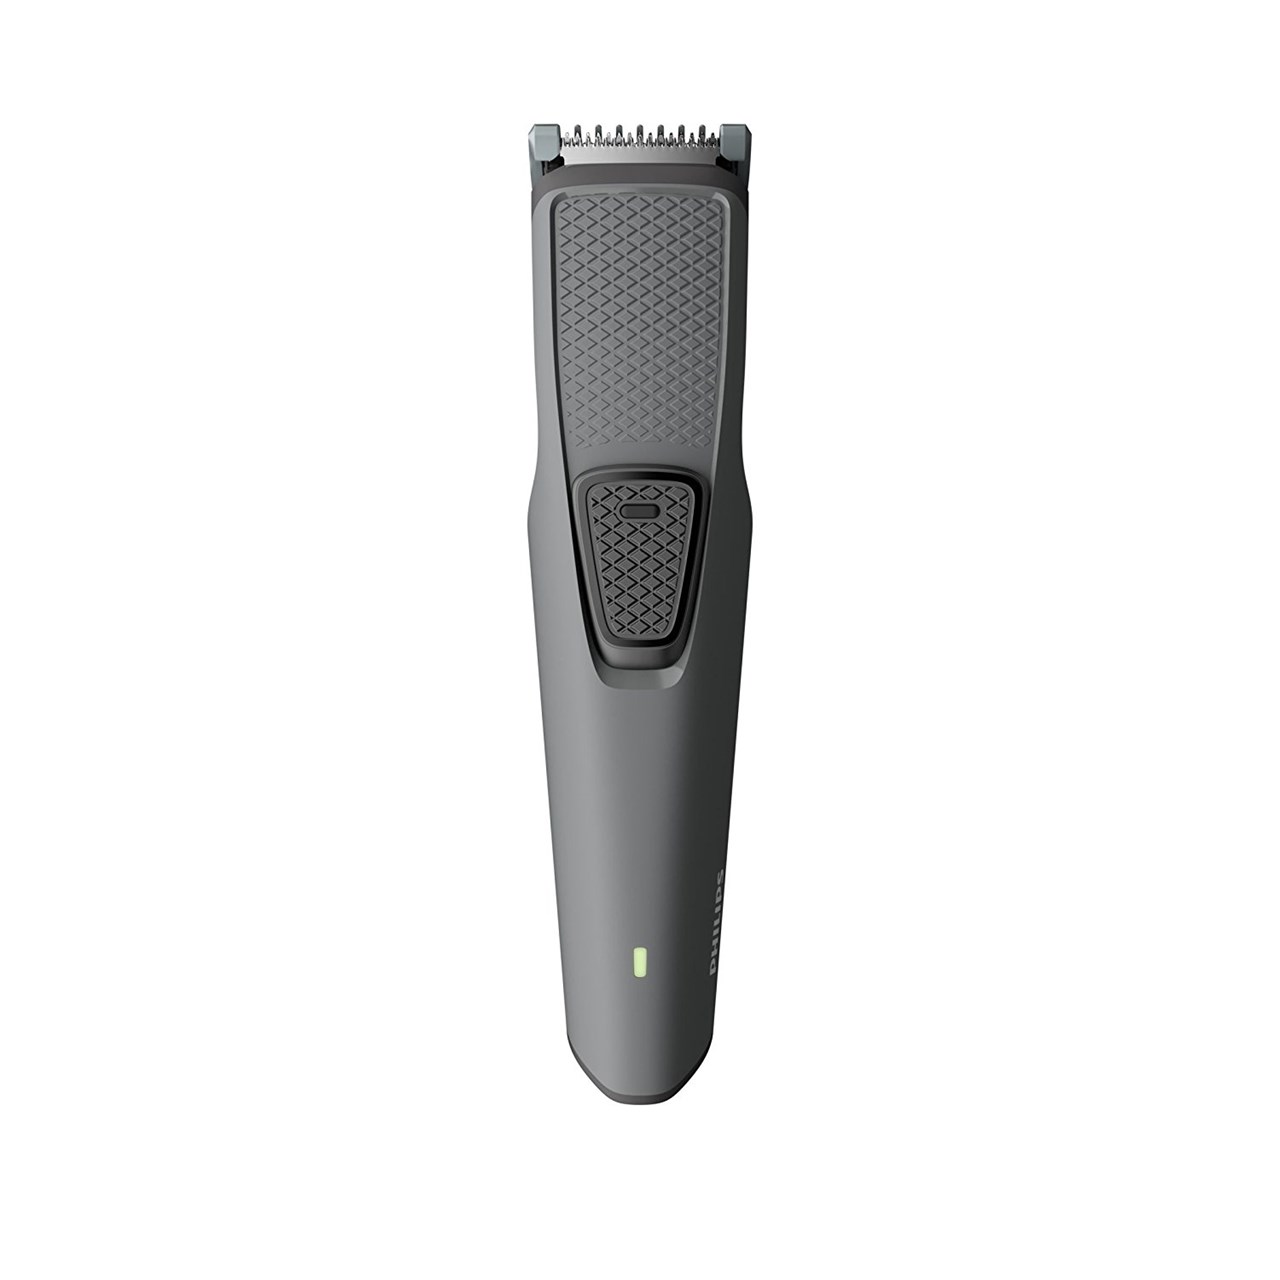 philips trimmer discount